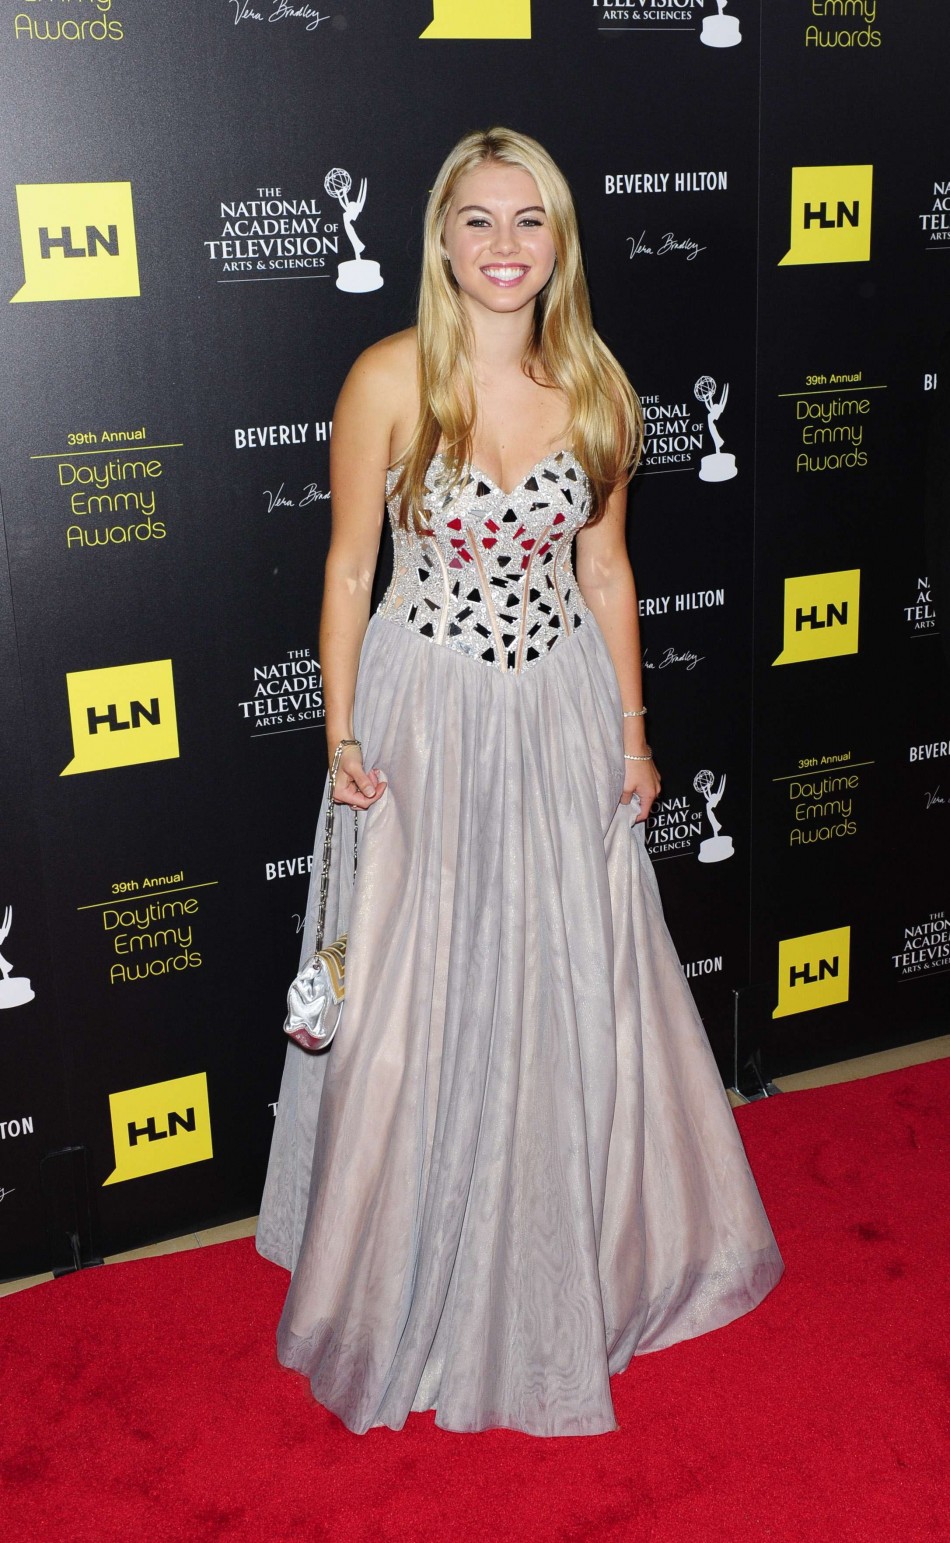 Lindsay Bushman arrives at the 39th Daytime Emmy Awards in Beverly Hills